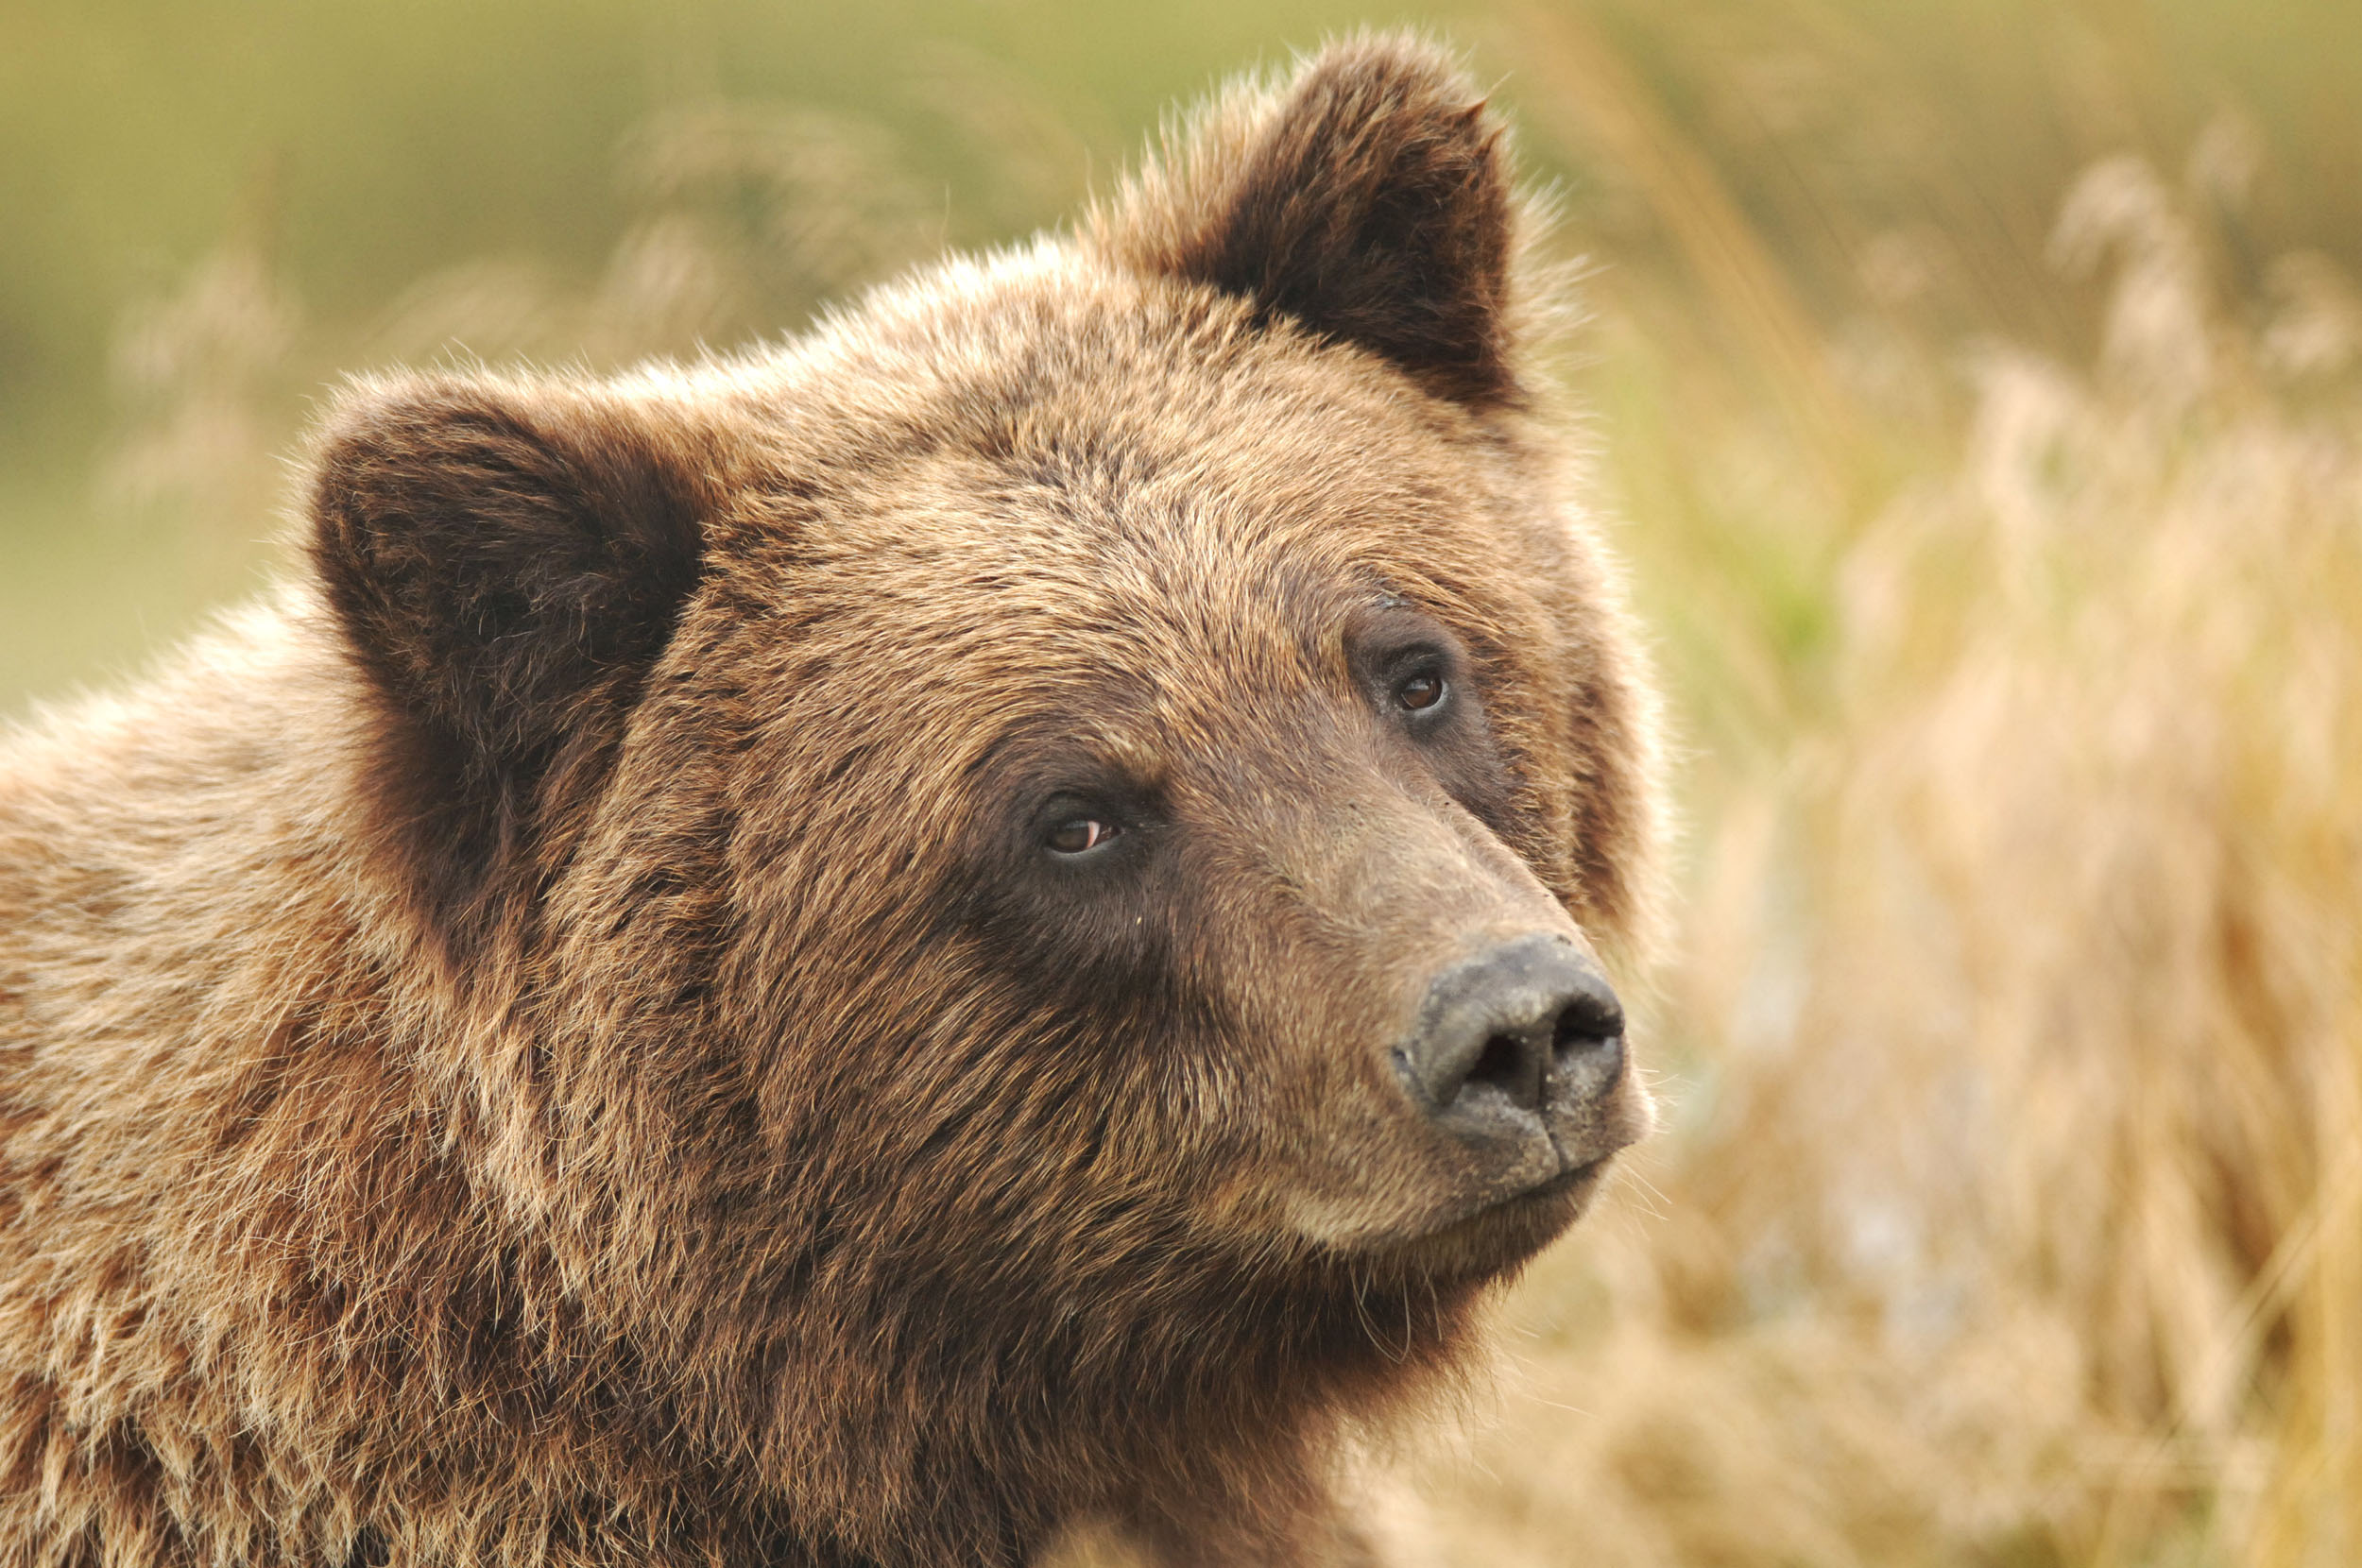 A grizzly bear is pictured in its enclosure at the Alaska Wi